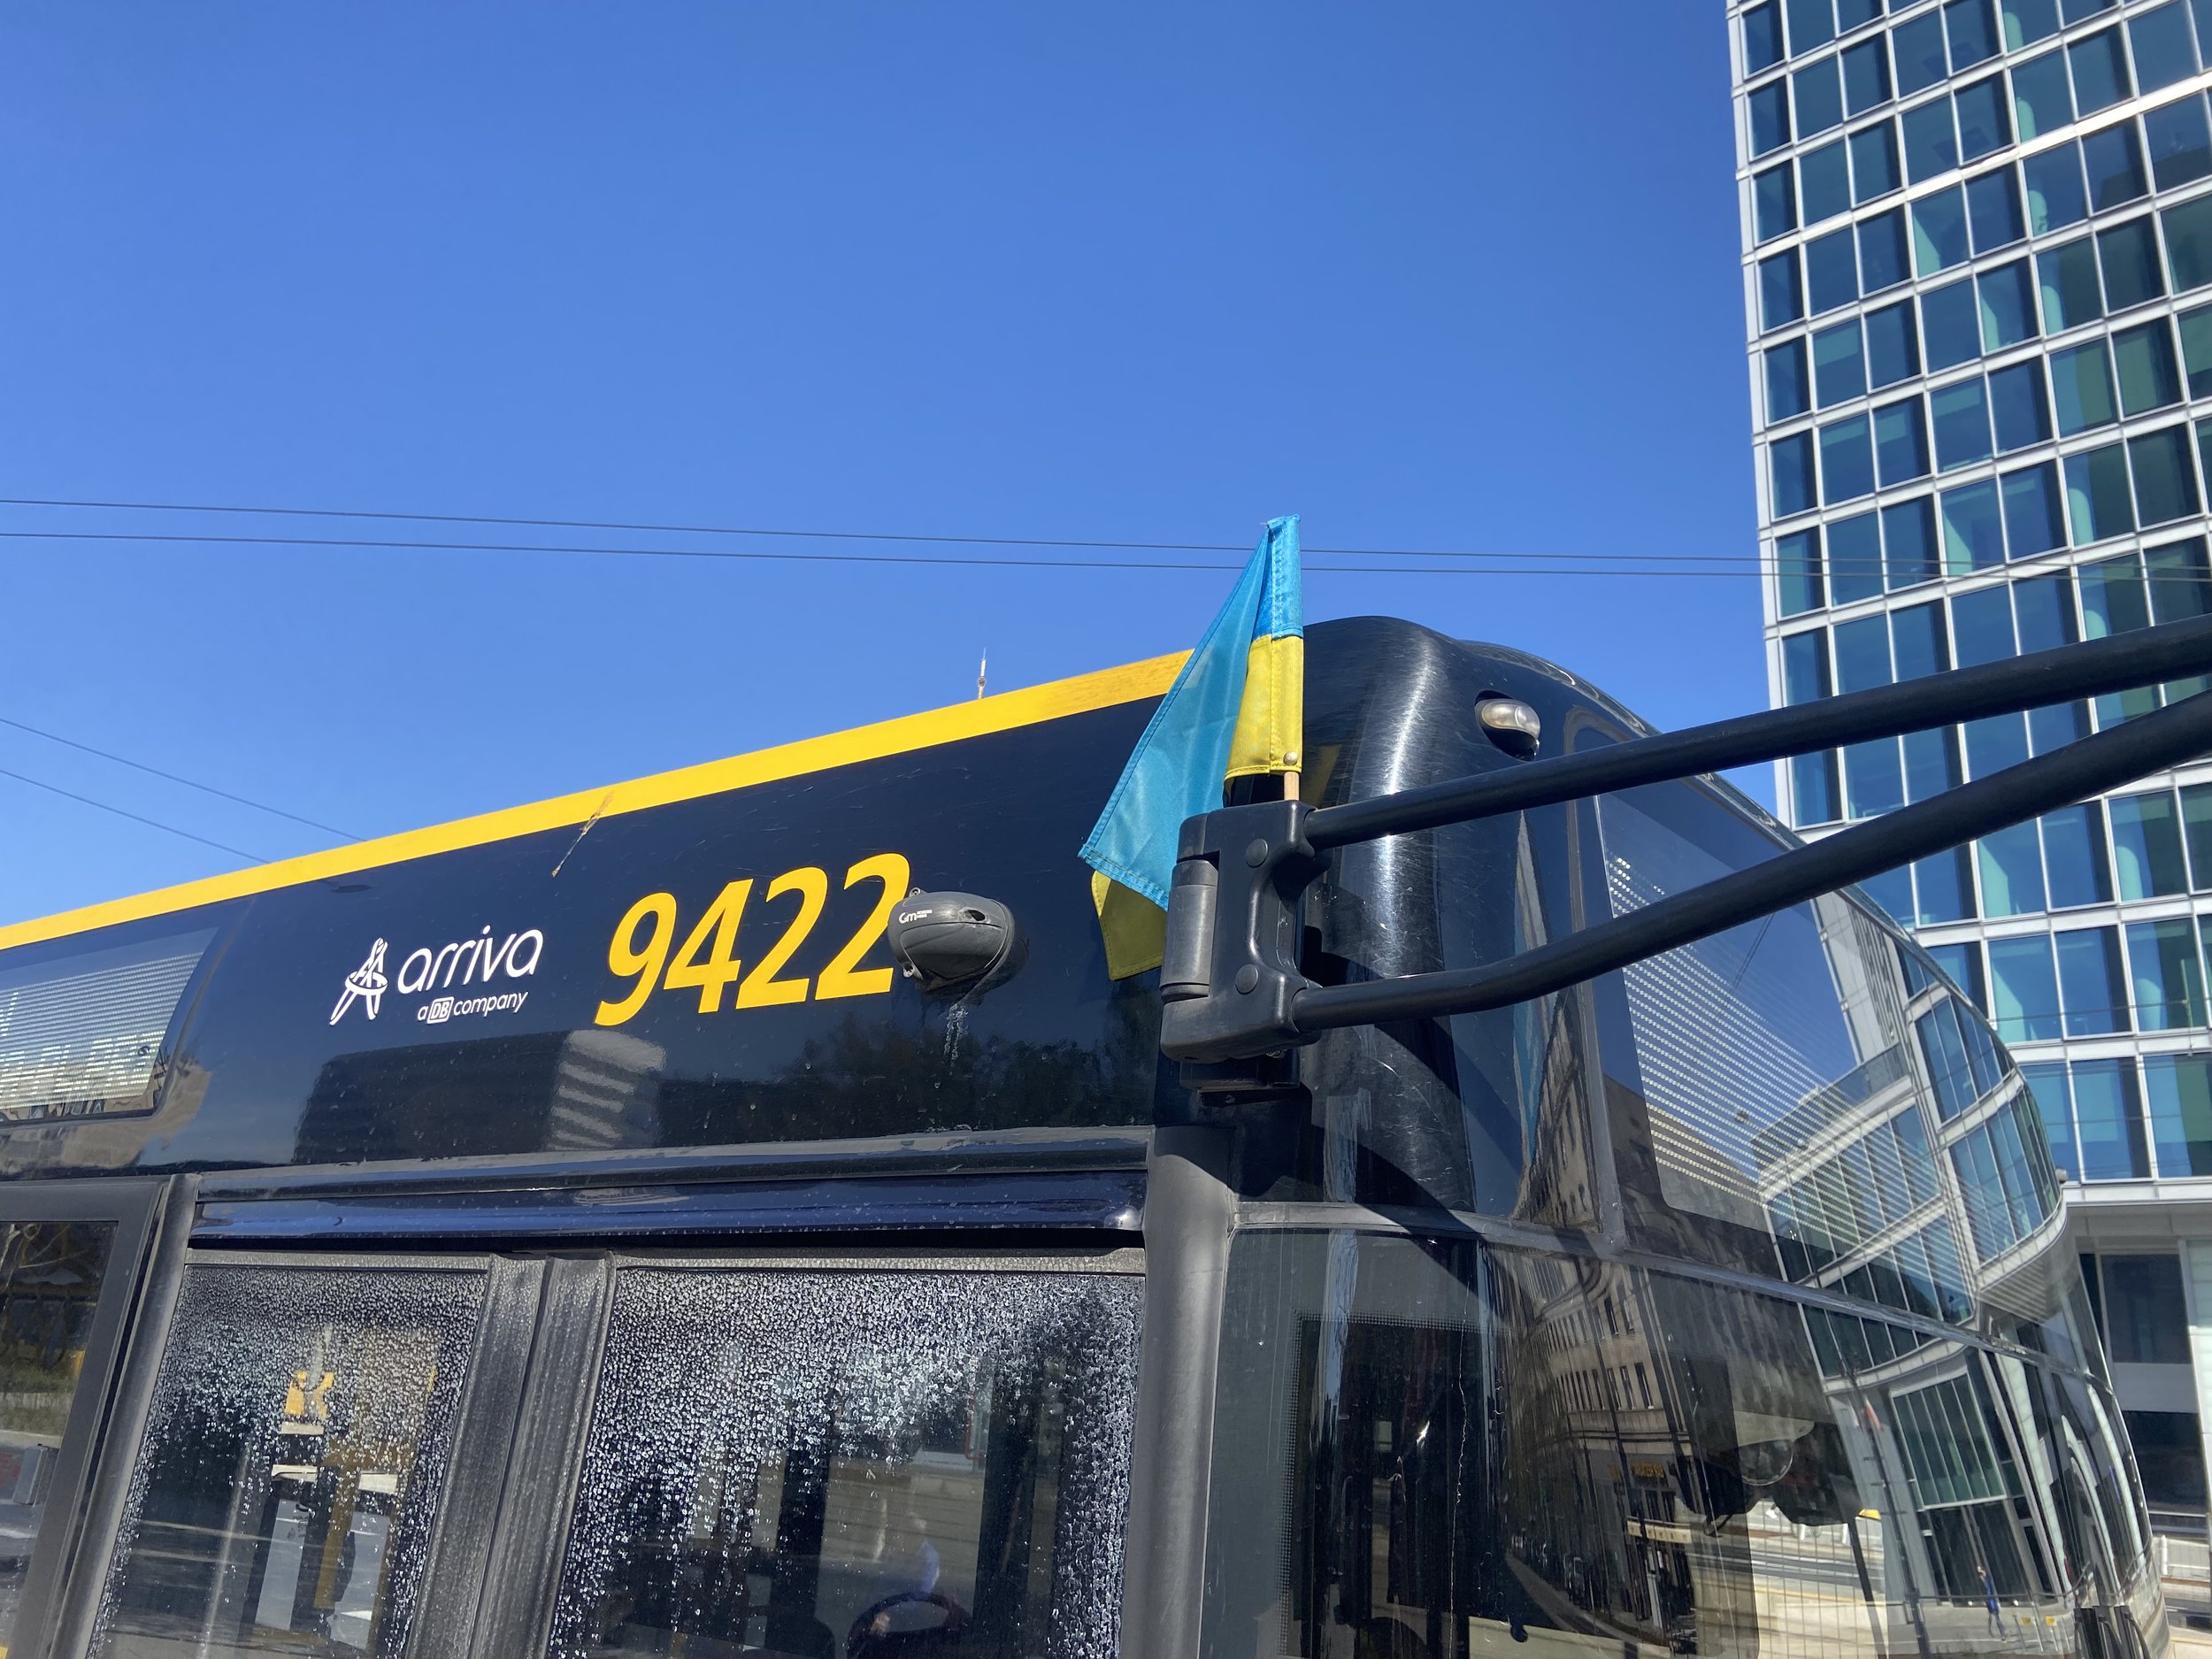 Poland shows support to Ukraine by flying their flag on all the buses